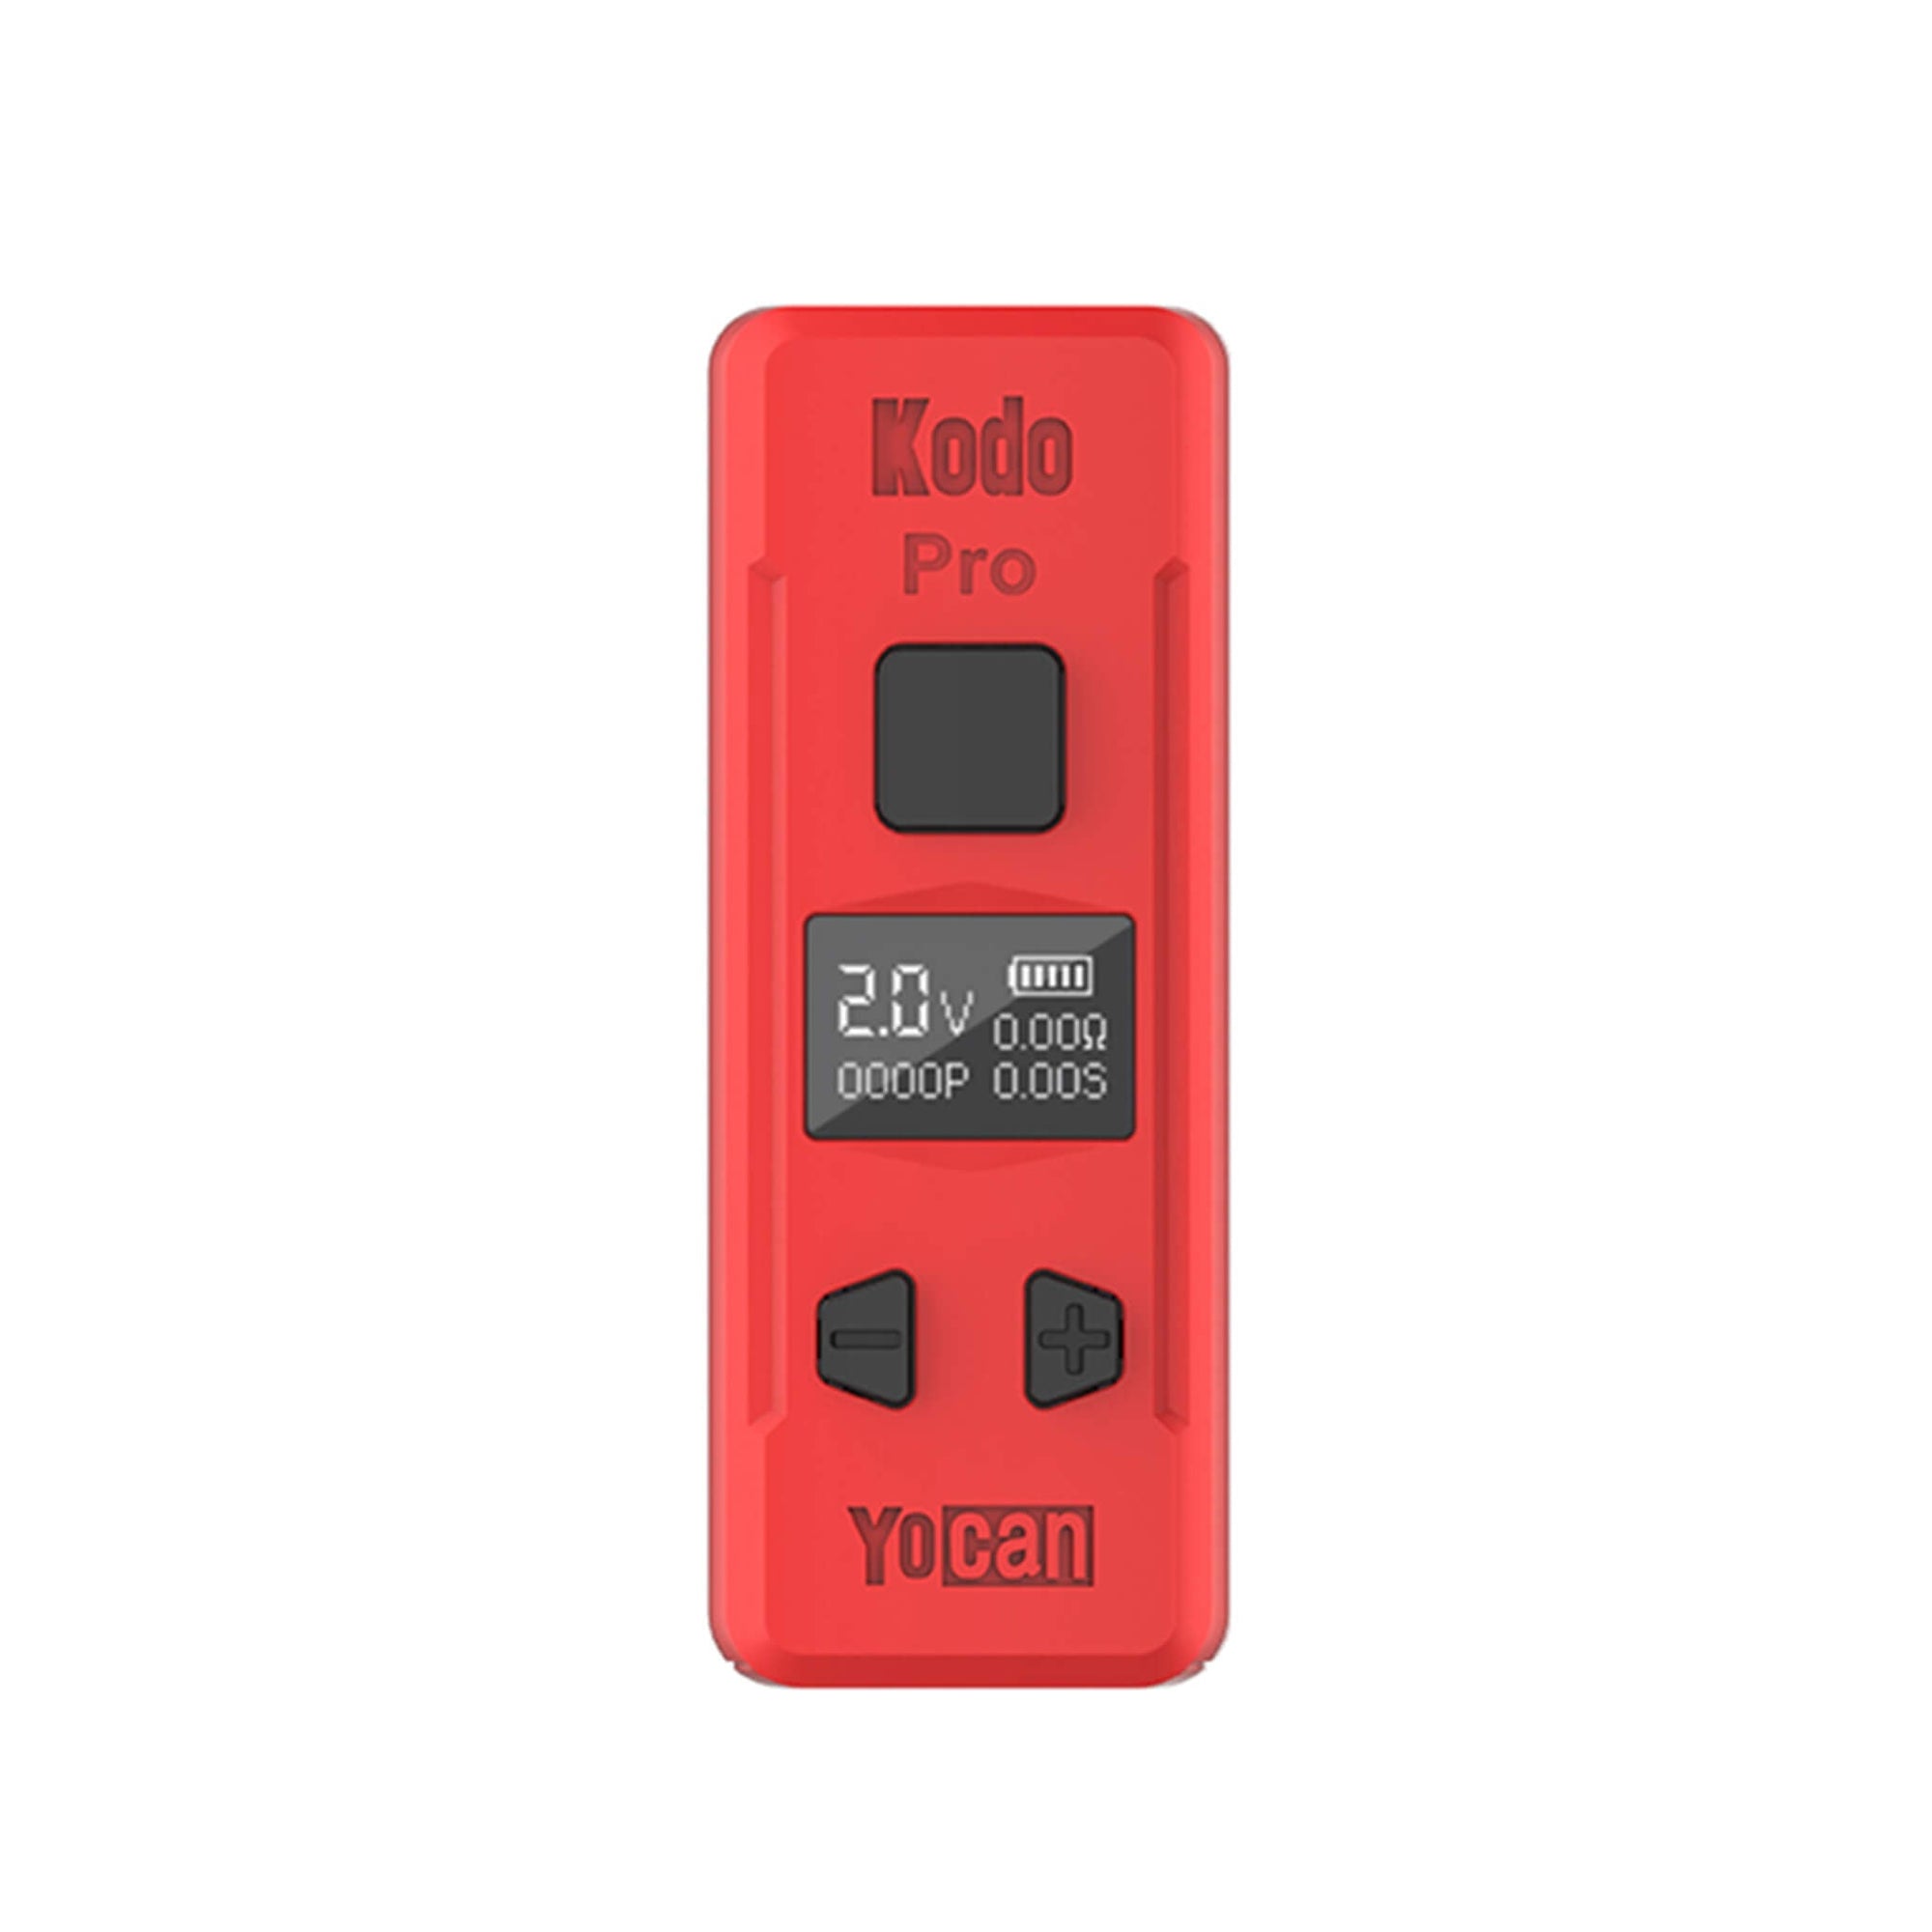 Yocan Kodo Pro 510 Thread Battery | Red Color View | the dabbing specialists